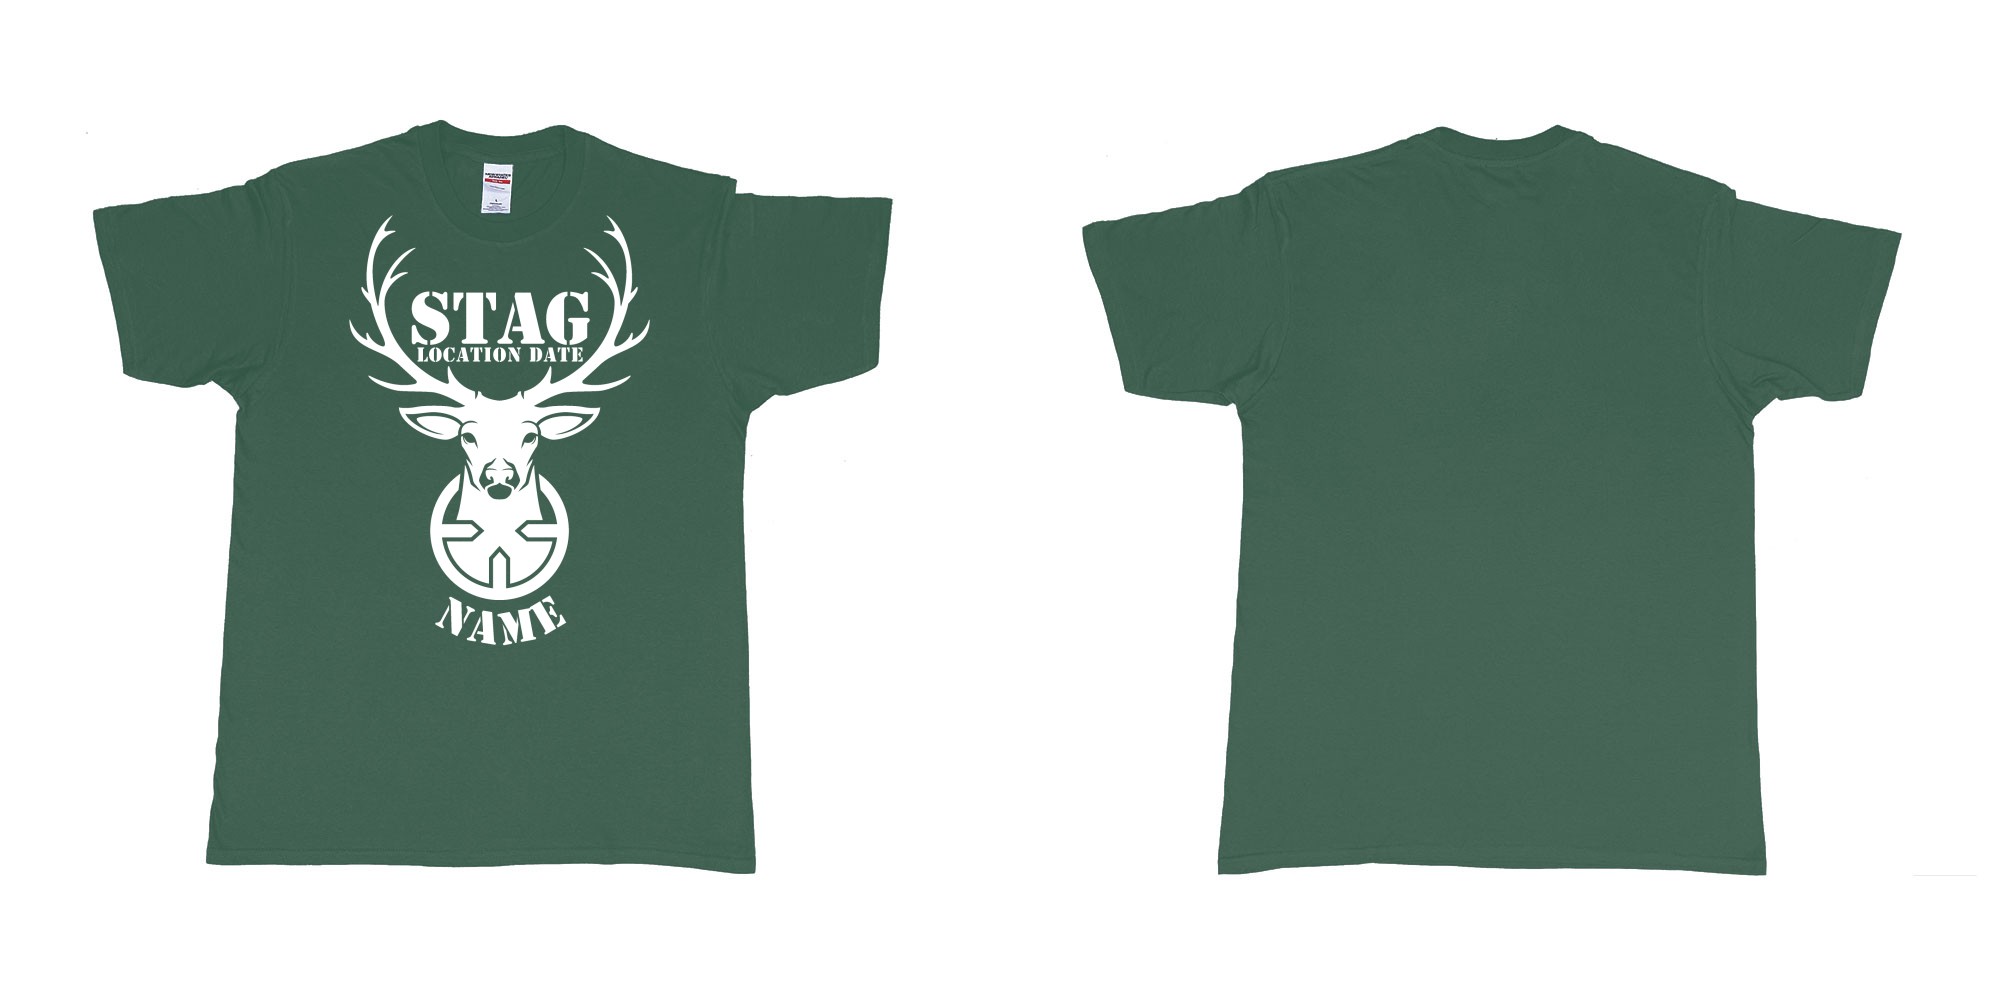 Custom tshirt design aiming for a stag custom tshirt print in fabric color forest-green choice your own text made in Bali by The Pirate Way